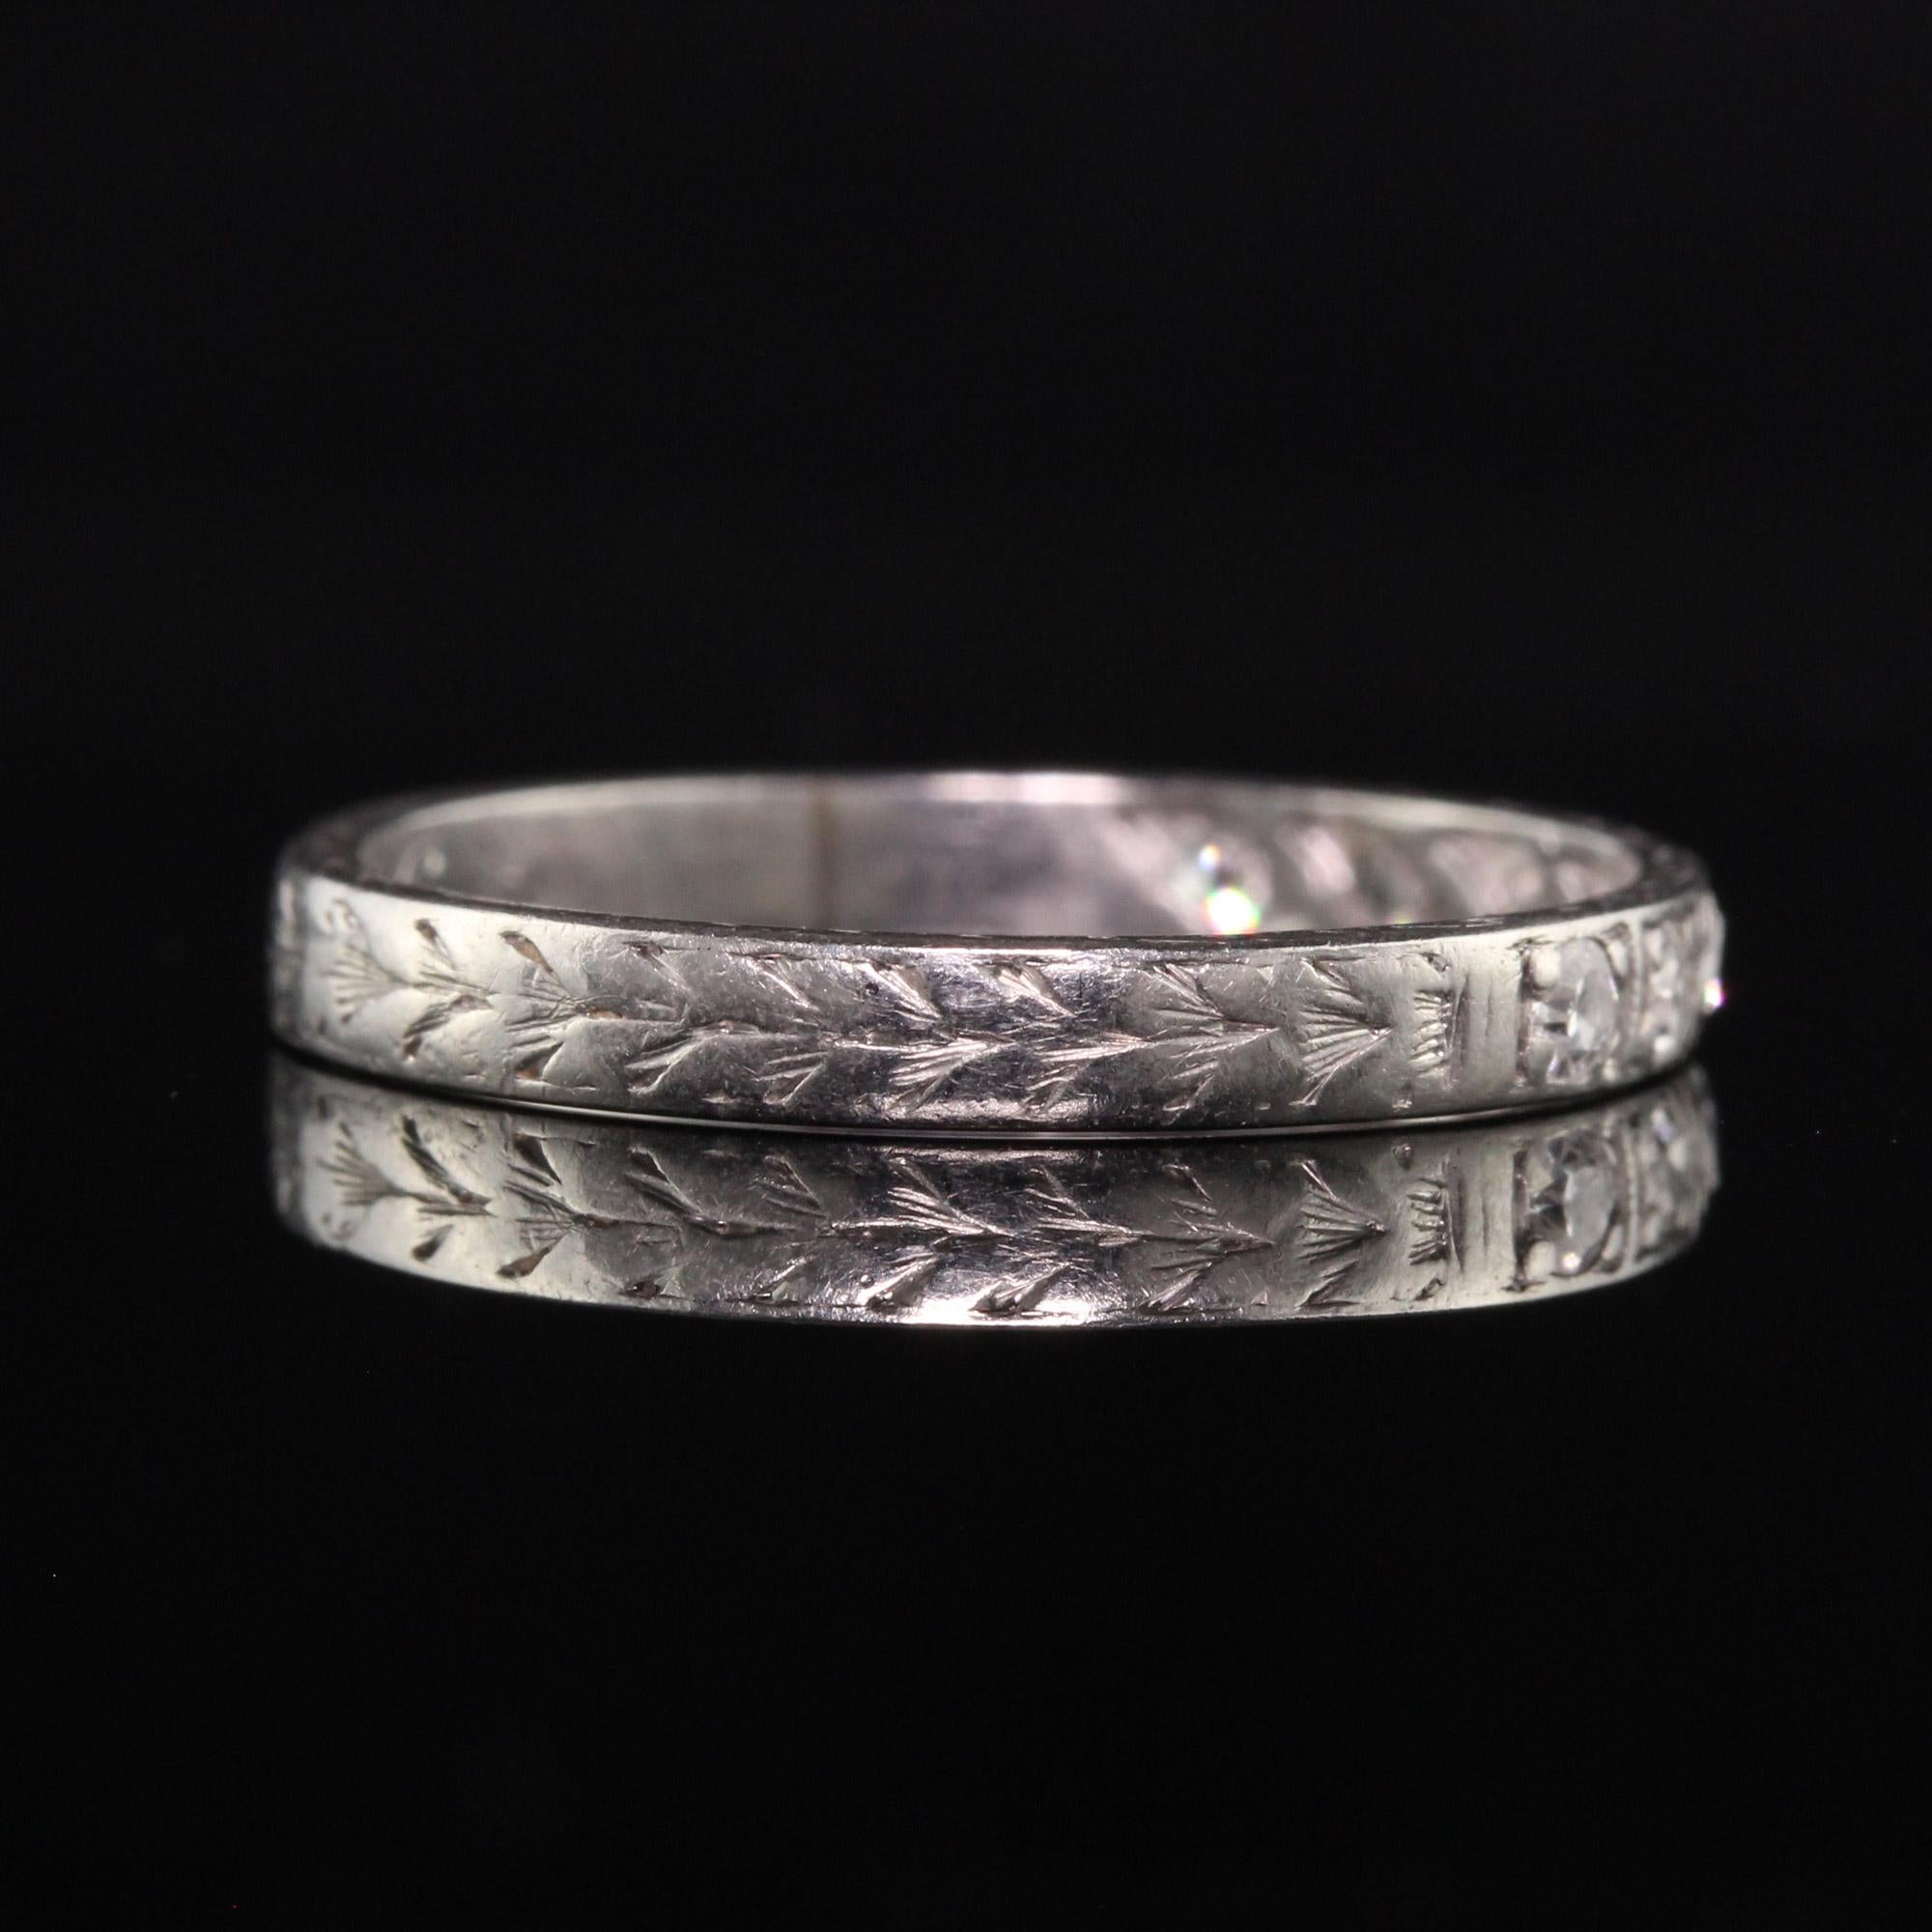 Antique Art Deco Platinum Single Cut Diamond Engraved Wedding Band In Good Condition For Sale In Great Neck, NY